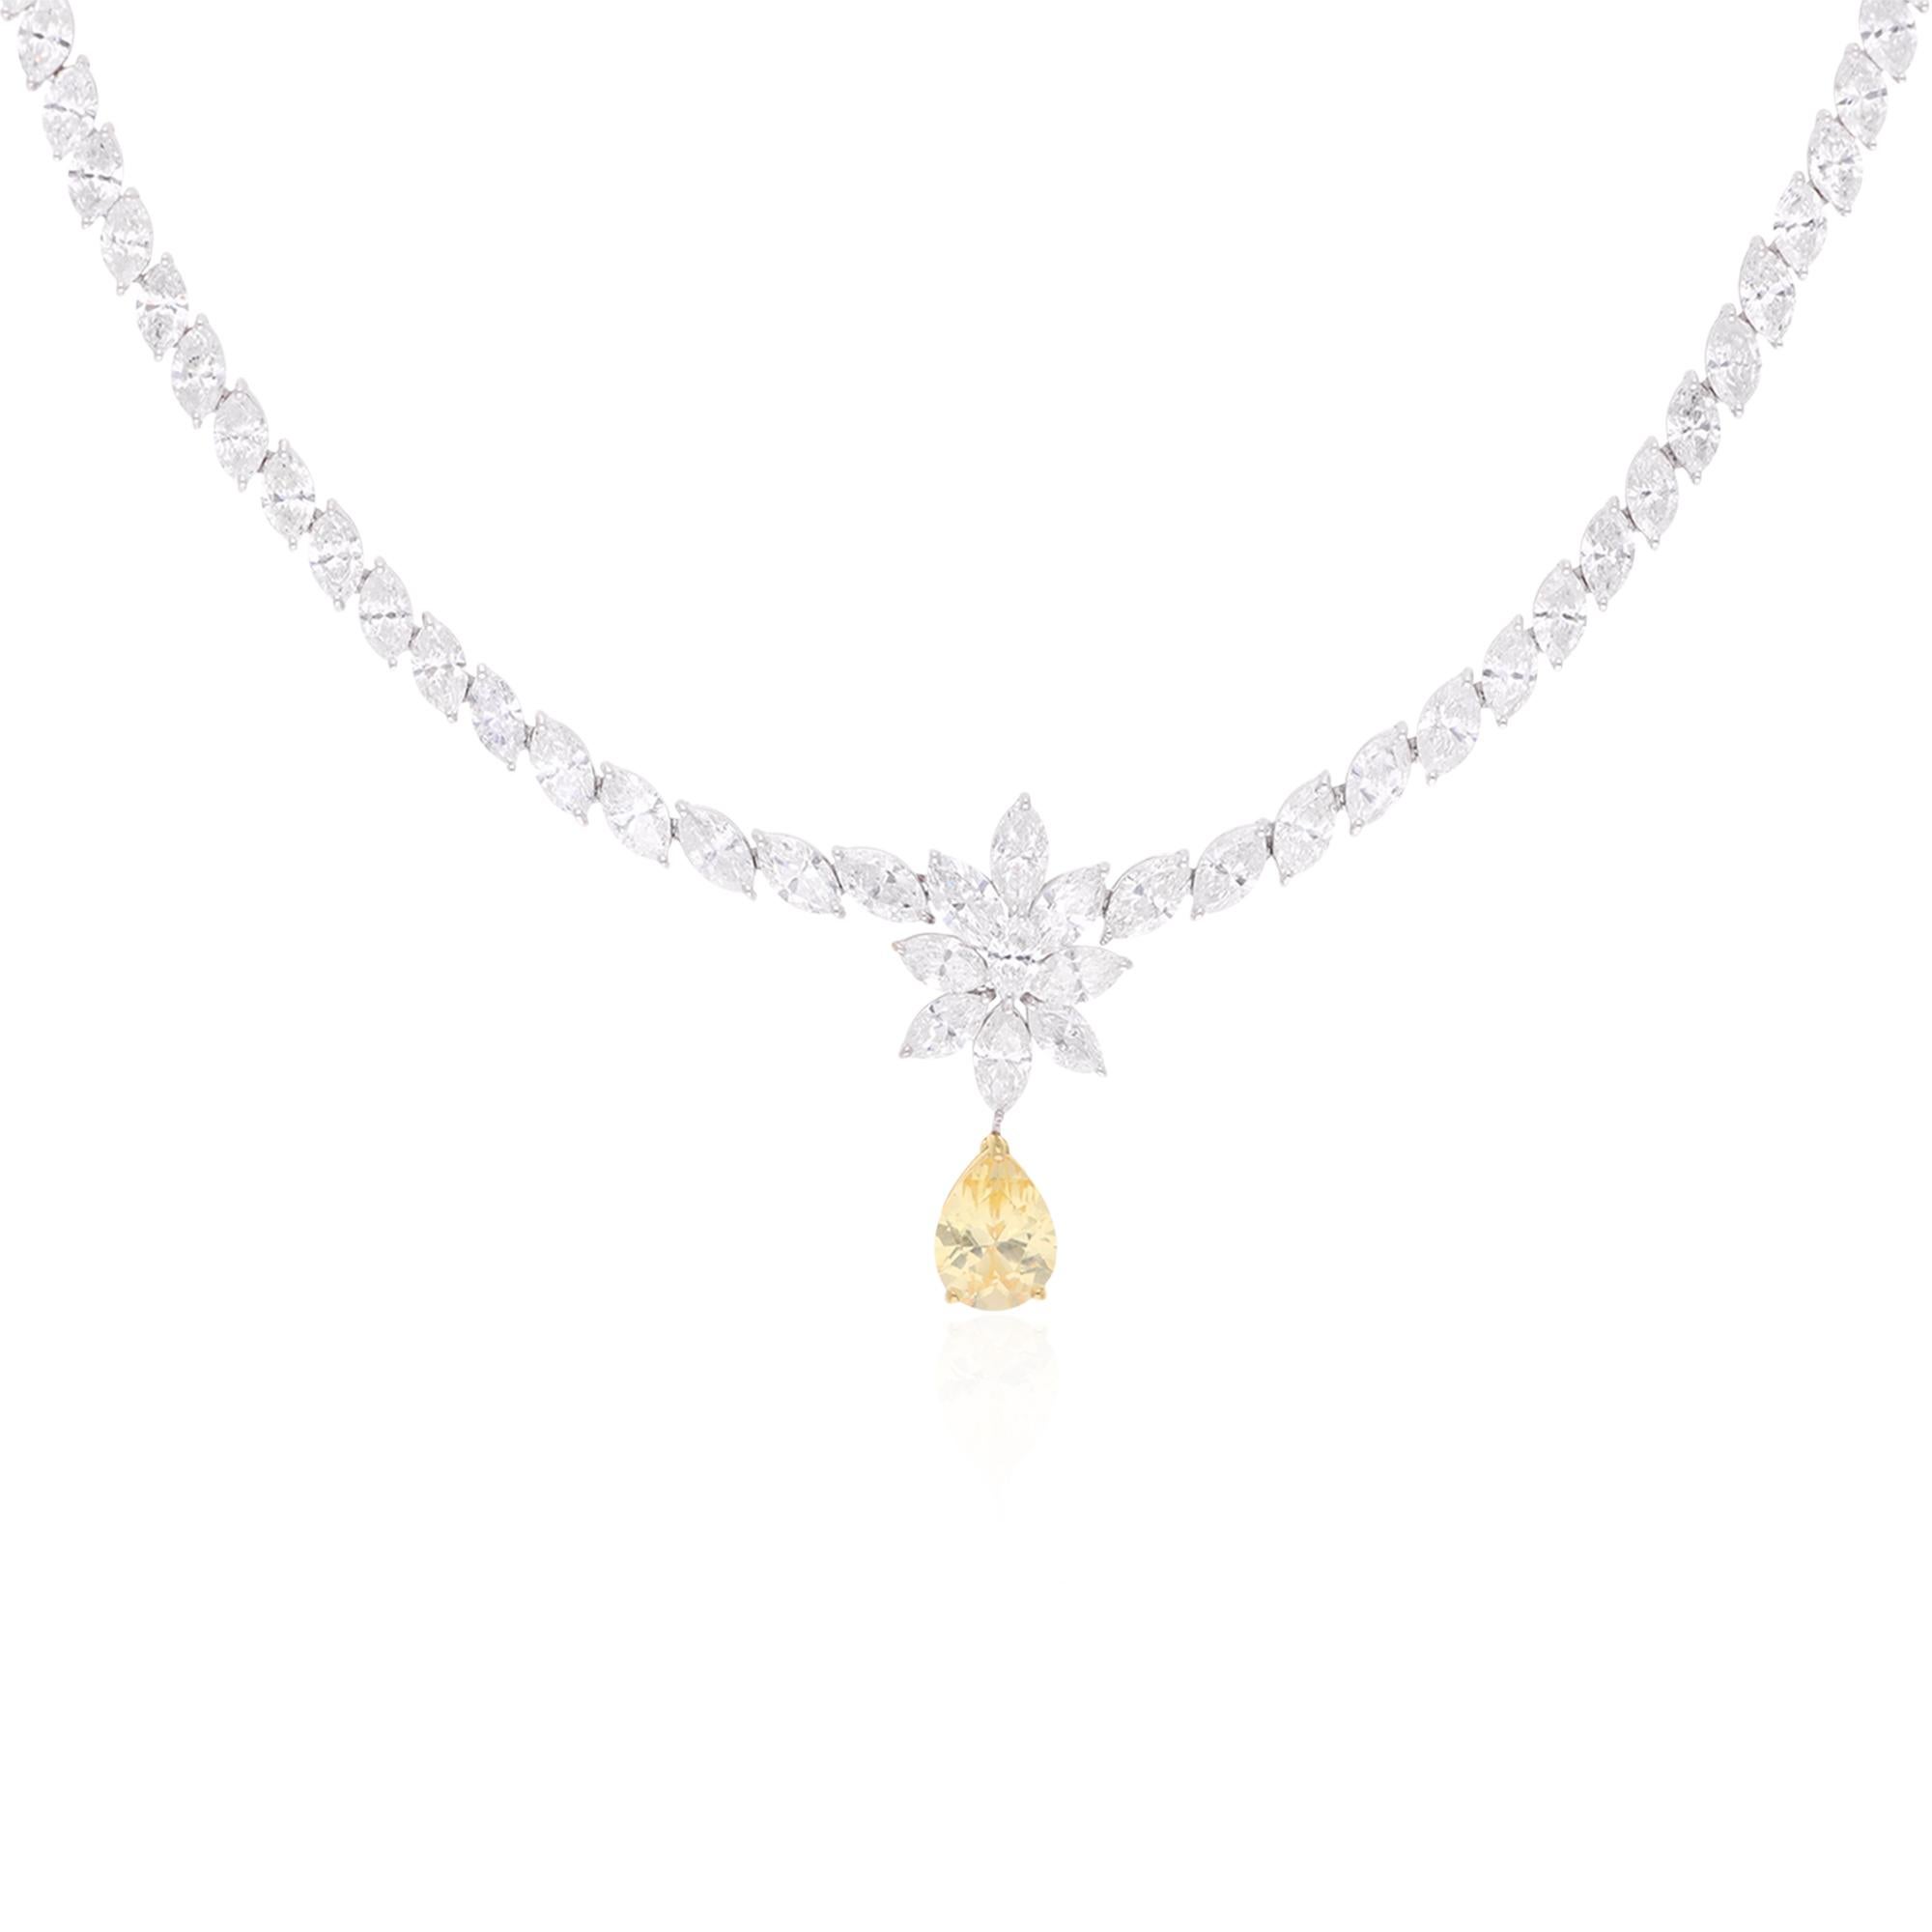 Immerse yourself in the allure of sophistication with this captivating Pear Gemstone Necklace, adorned with shimmering Marquise Diamonds and meticulously handcrafted in elegant 14 Karat White Gold. This exquisite piece of handmade jewelry is a